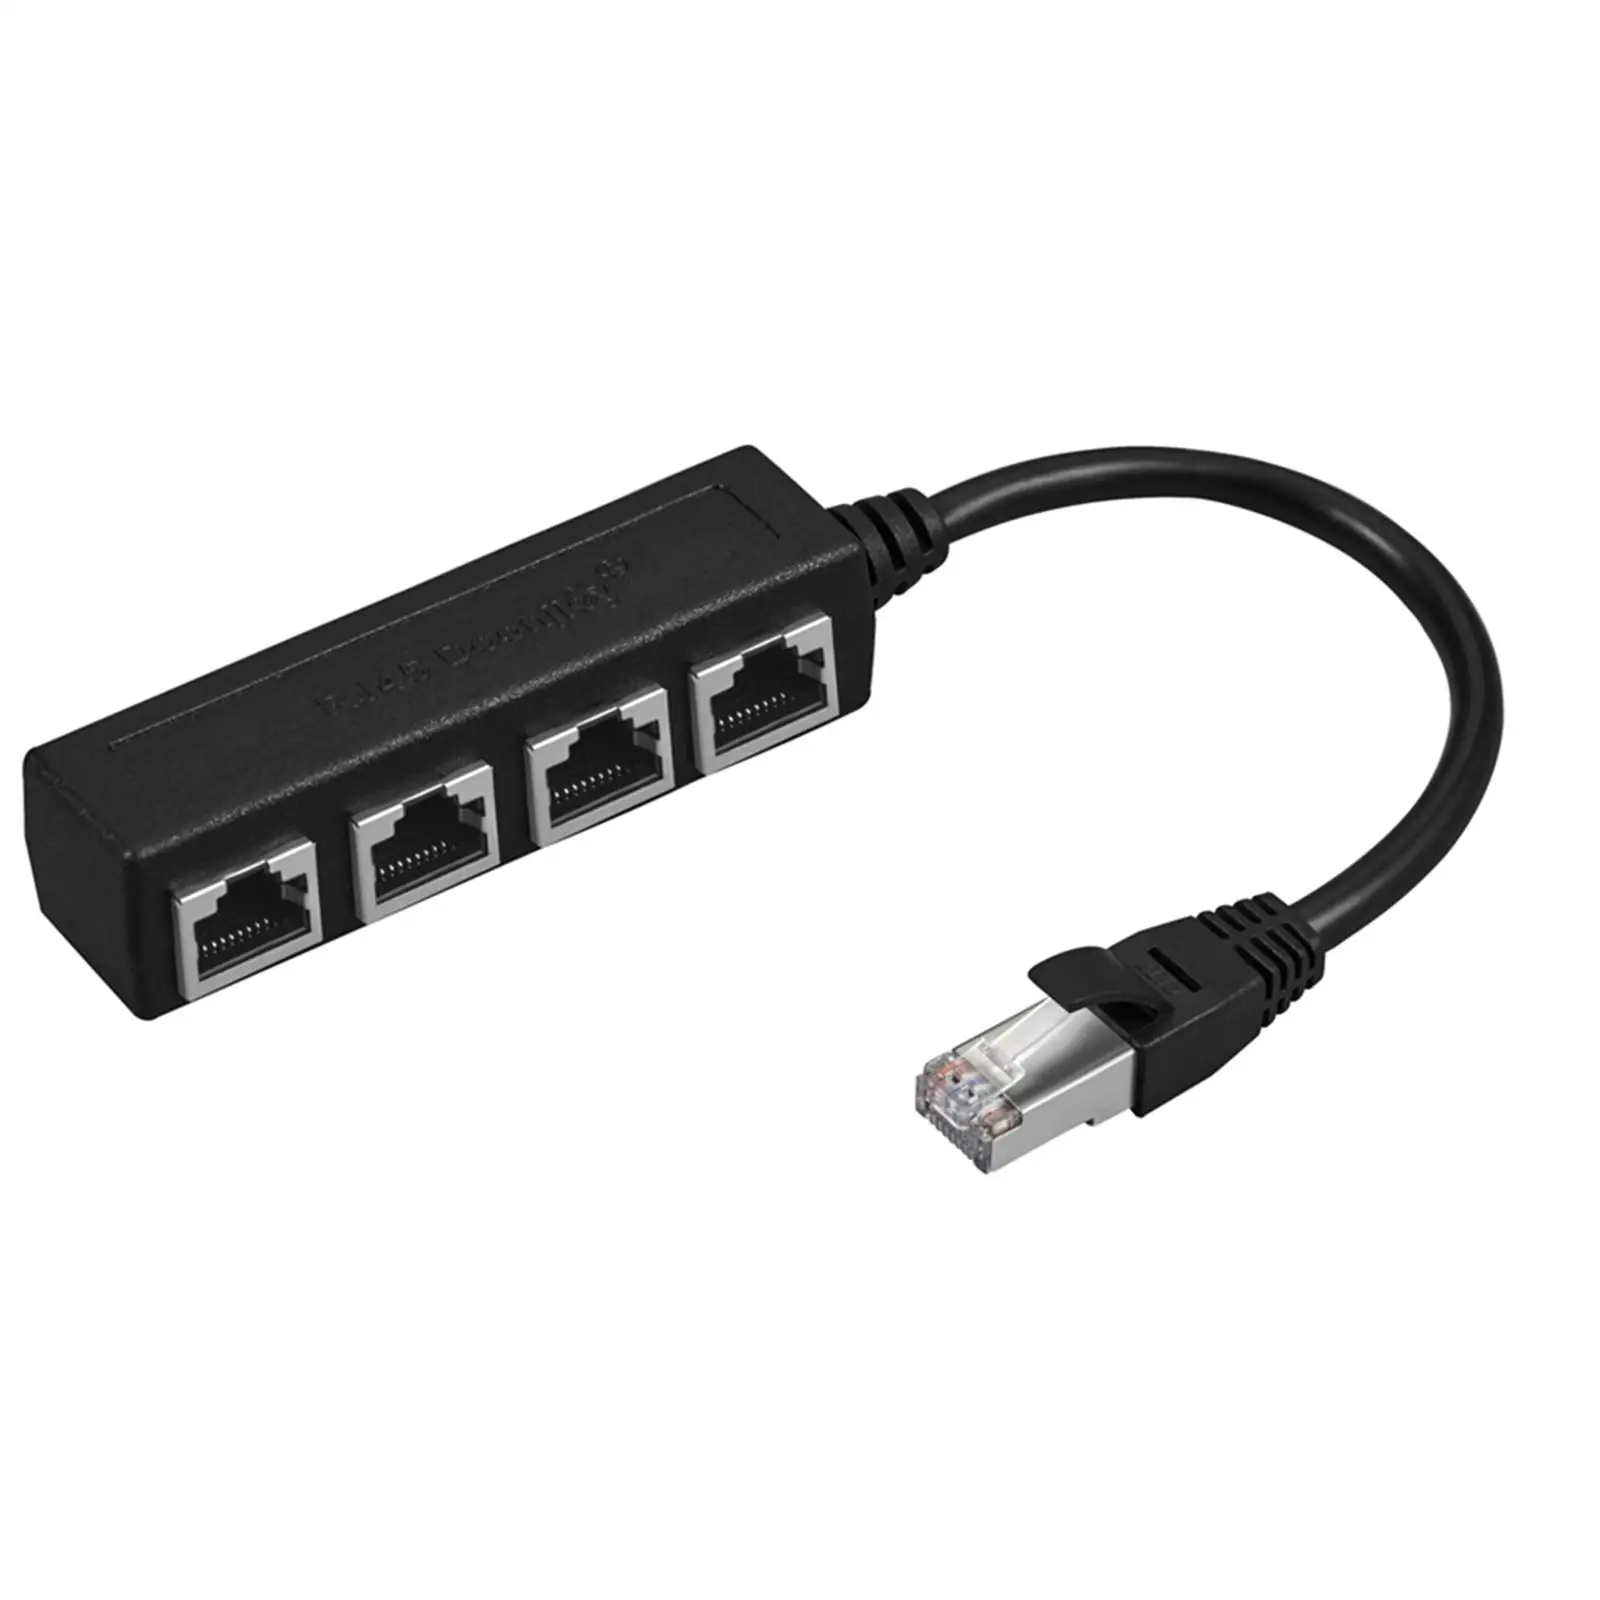 Ethernet Splitter 1 Male to 4x Female Plug and Play PVC 1 to 4 LAN Network Extension Cable Connector for Laptop Computer